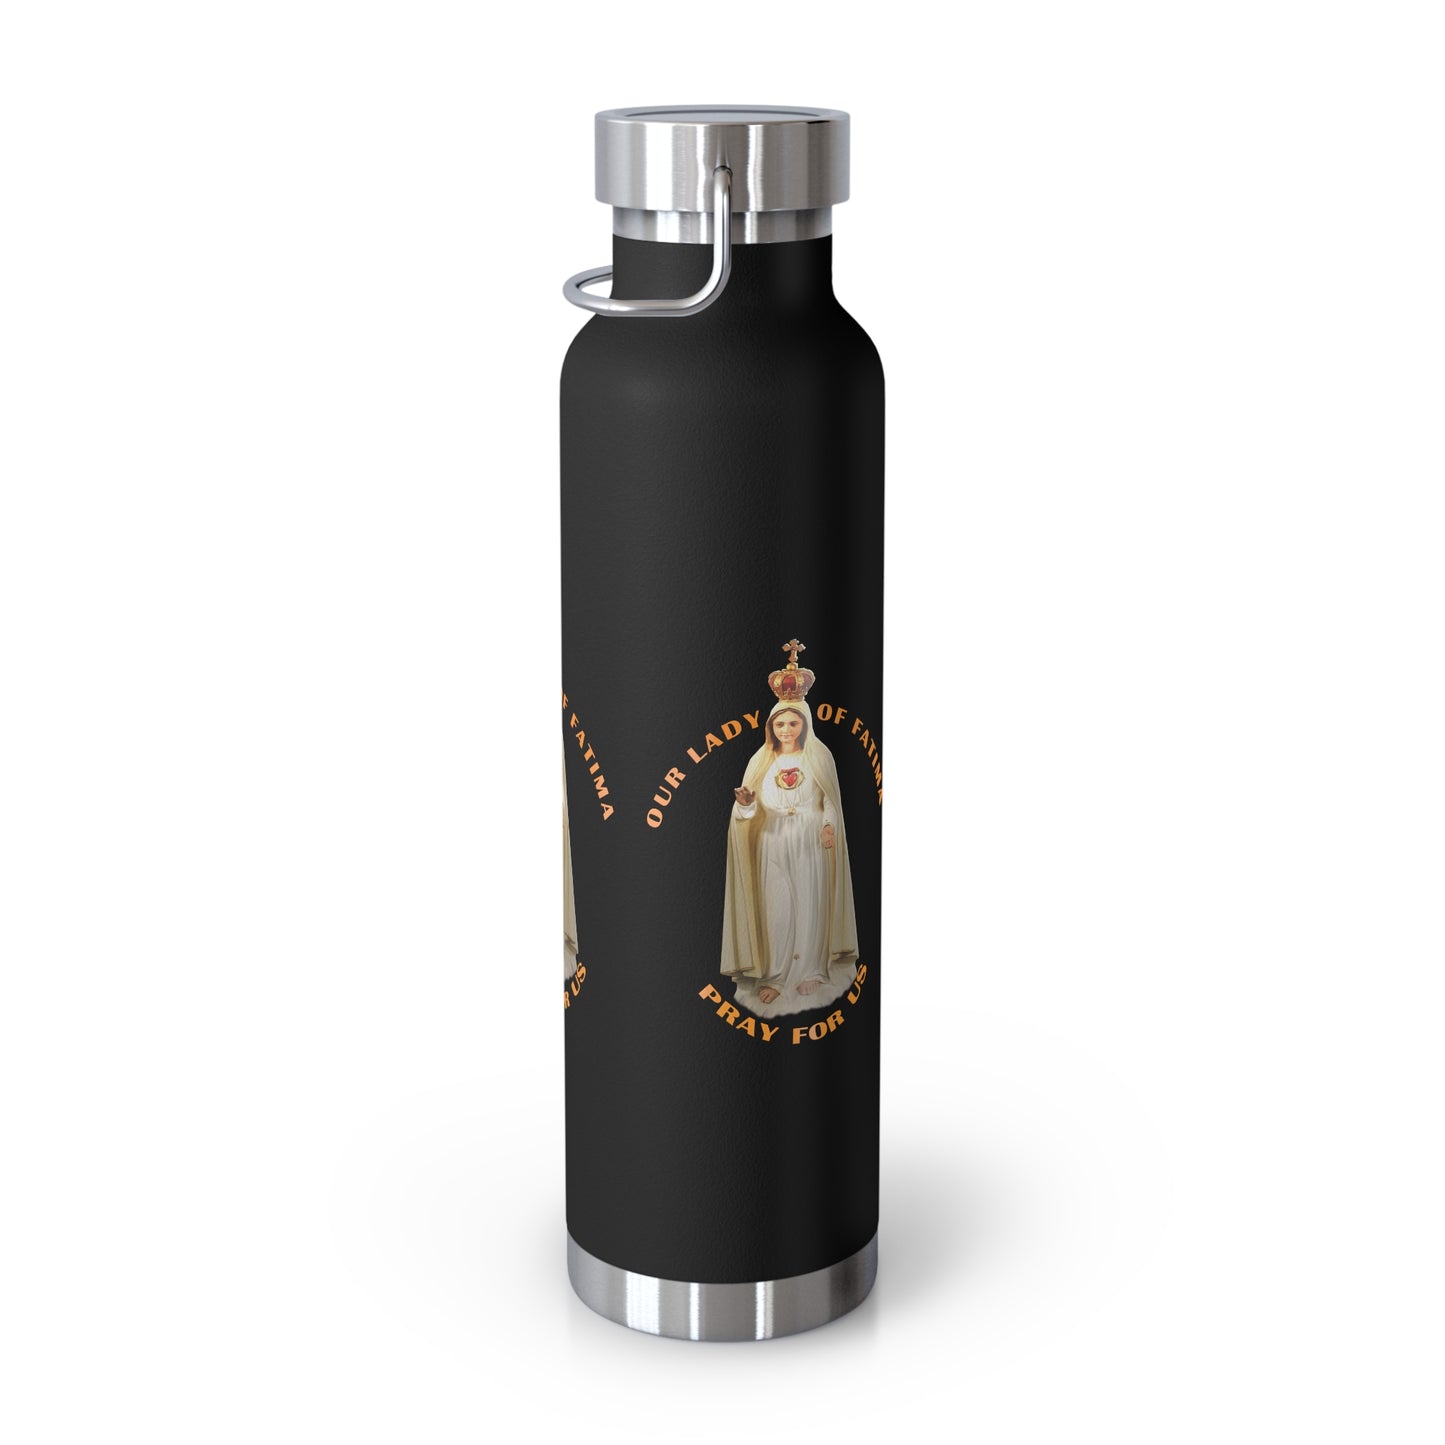 Our Lady of Fatima Pray for Us Copper Vacuum Insulated Bottle, 22oz